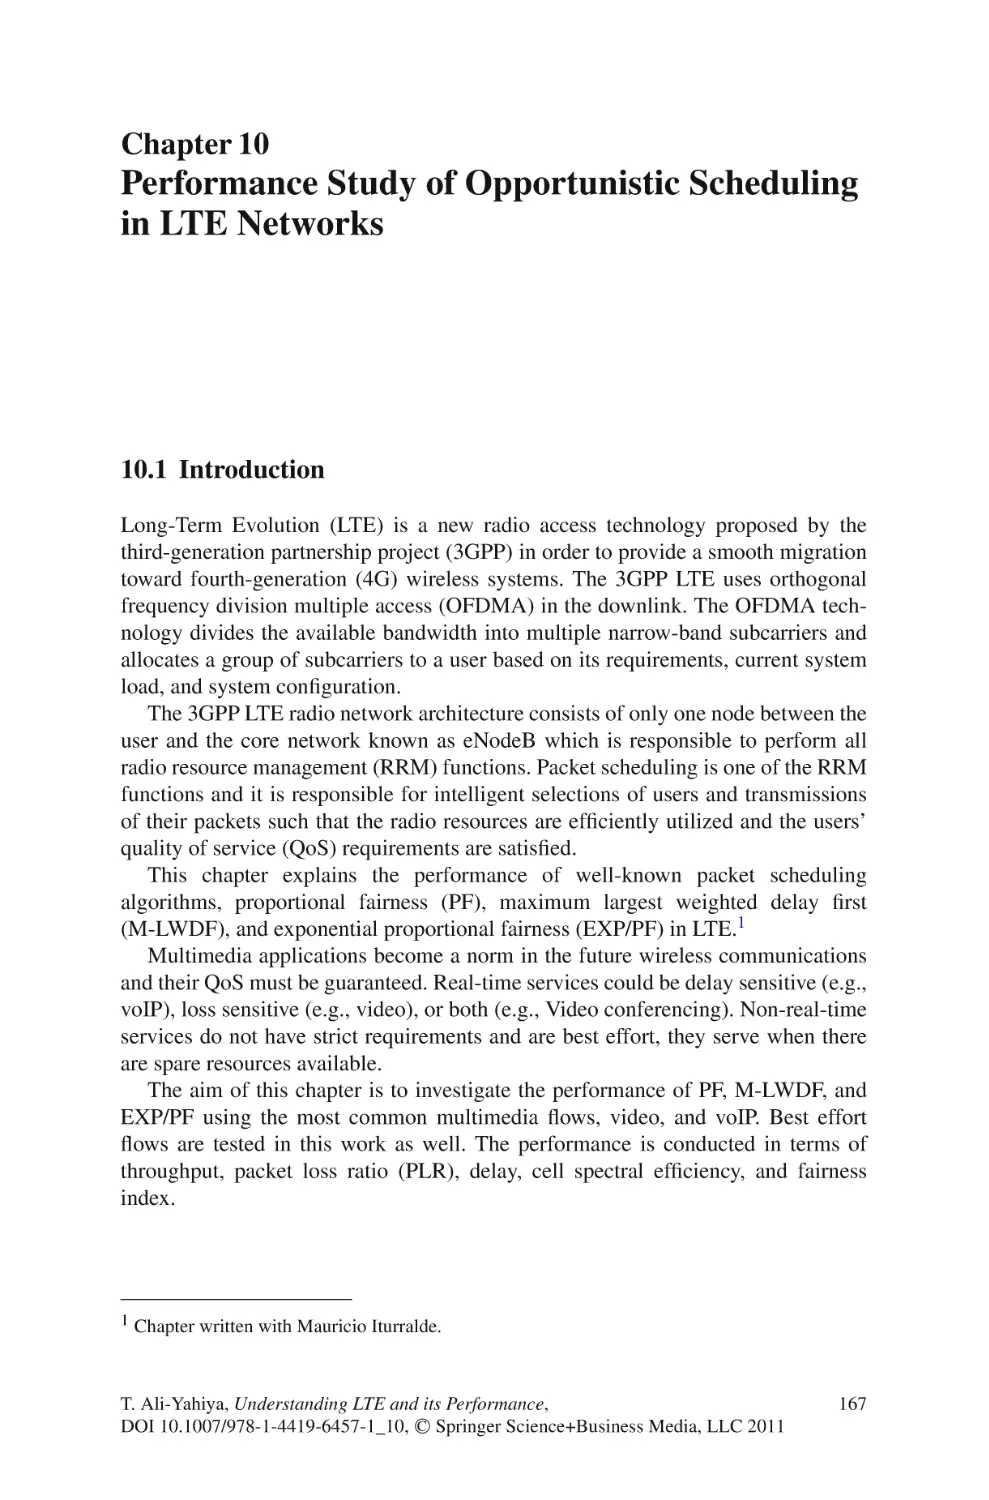 10  Performance Study of Opportunistic Scheduling in LTE Networks
10.1  Introduction